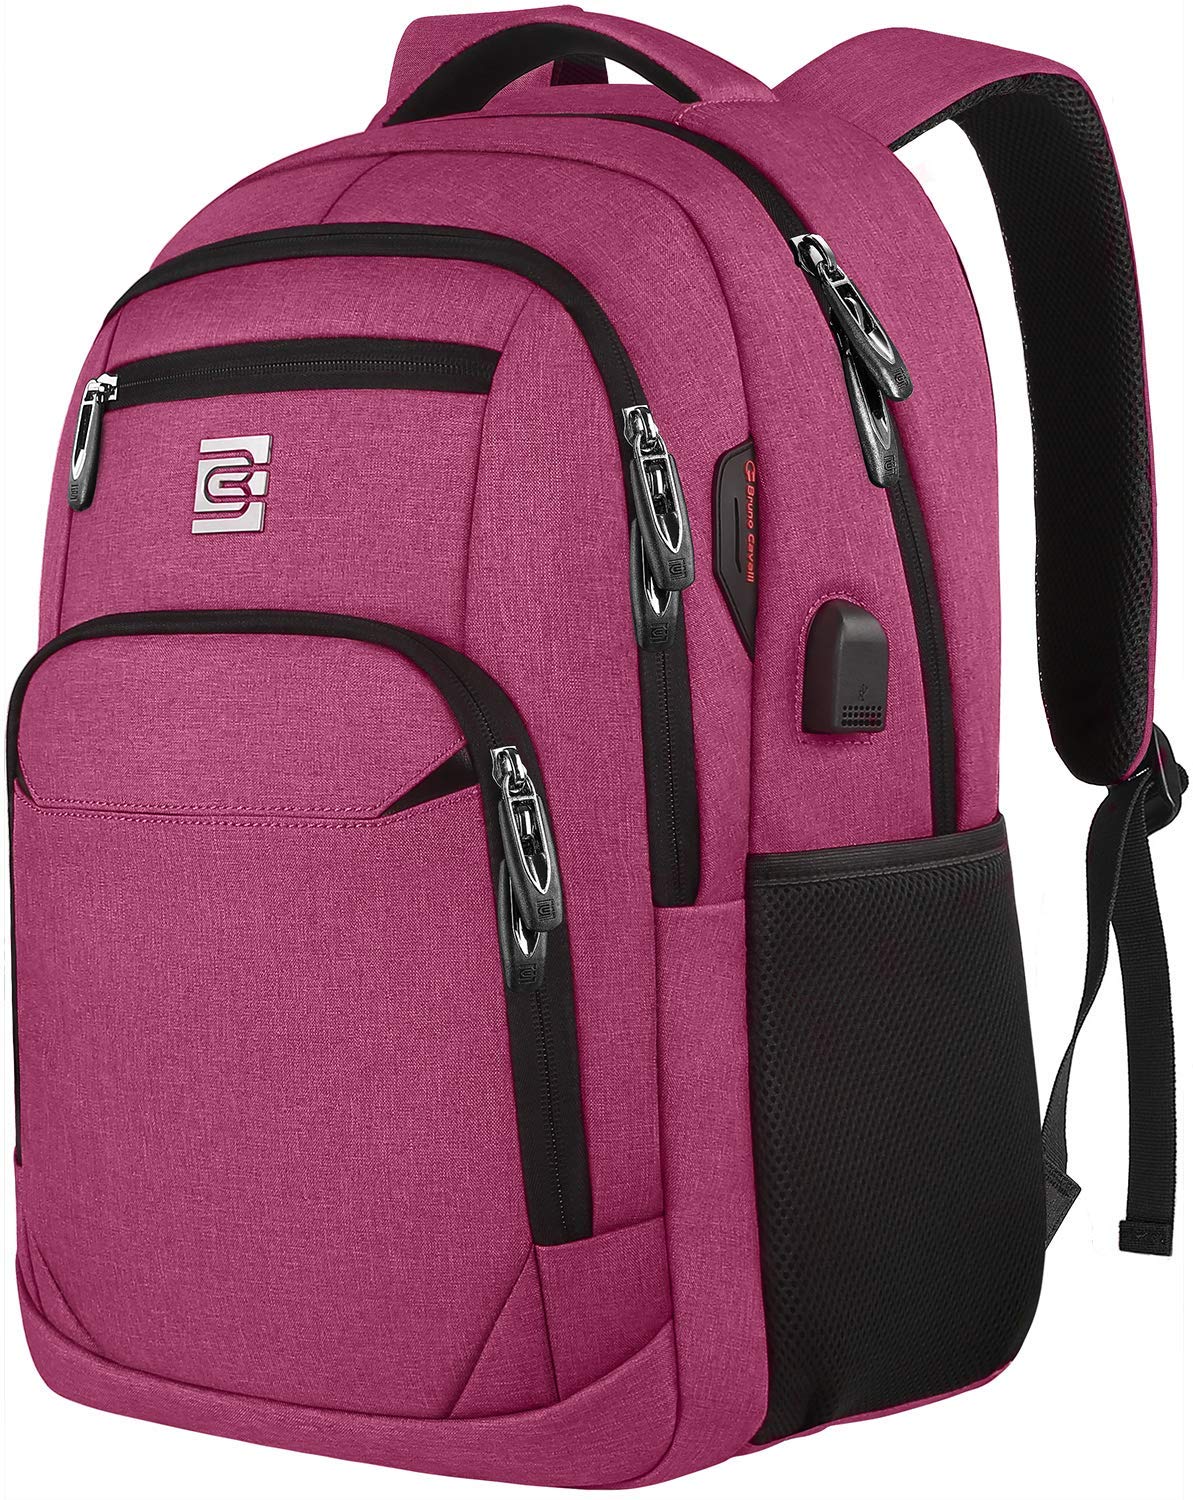 Dark pink backpack with black zippers and accents